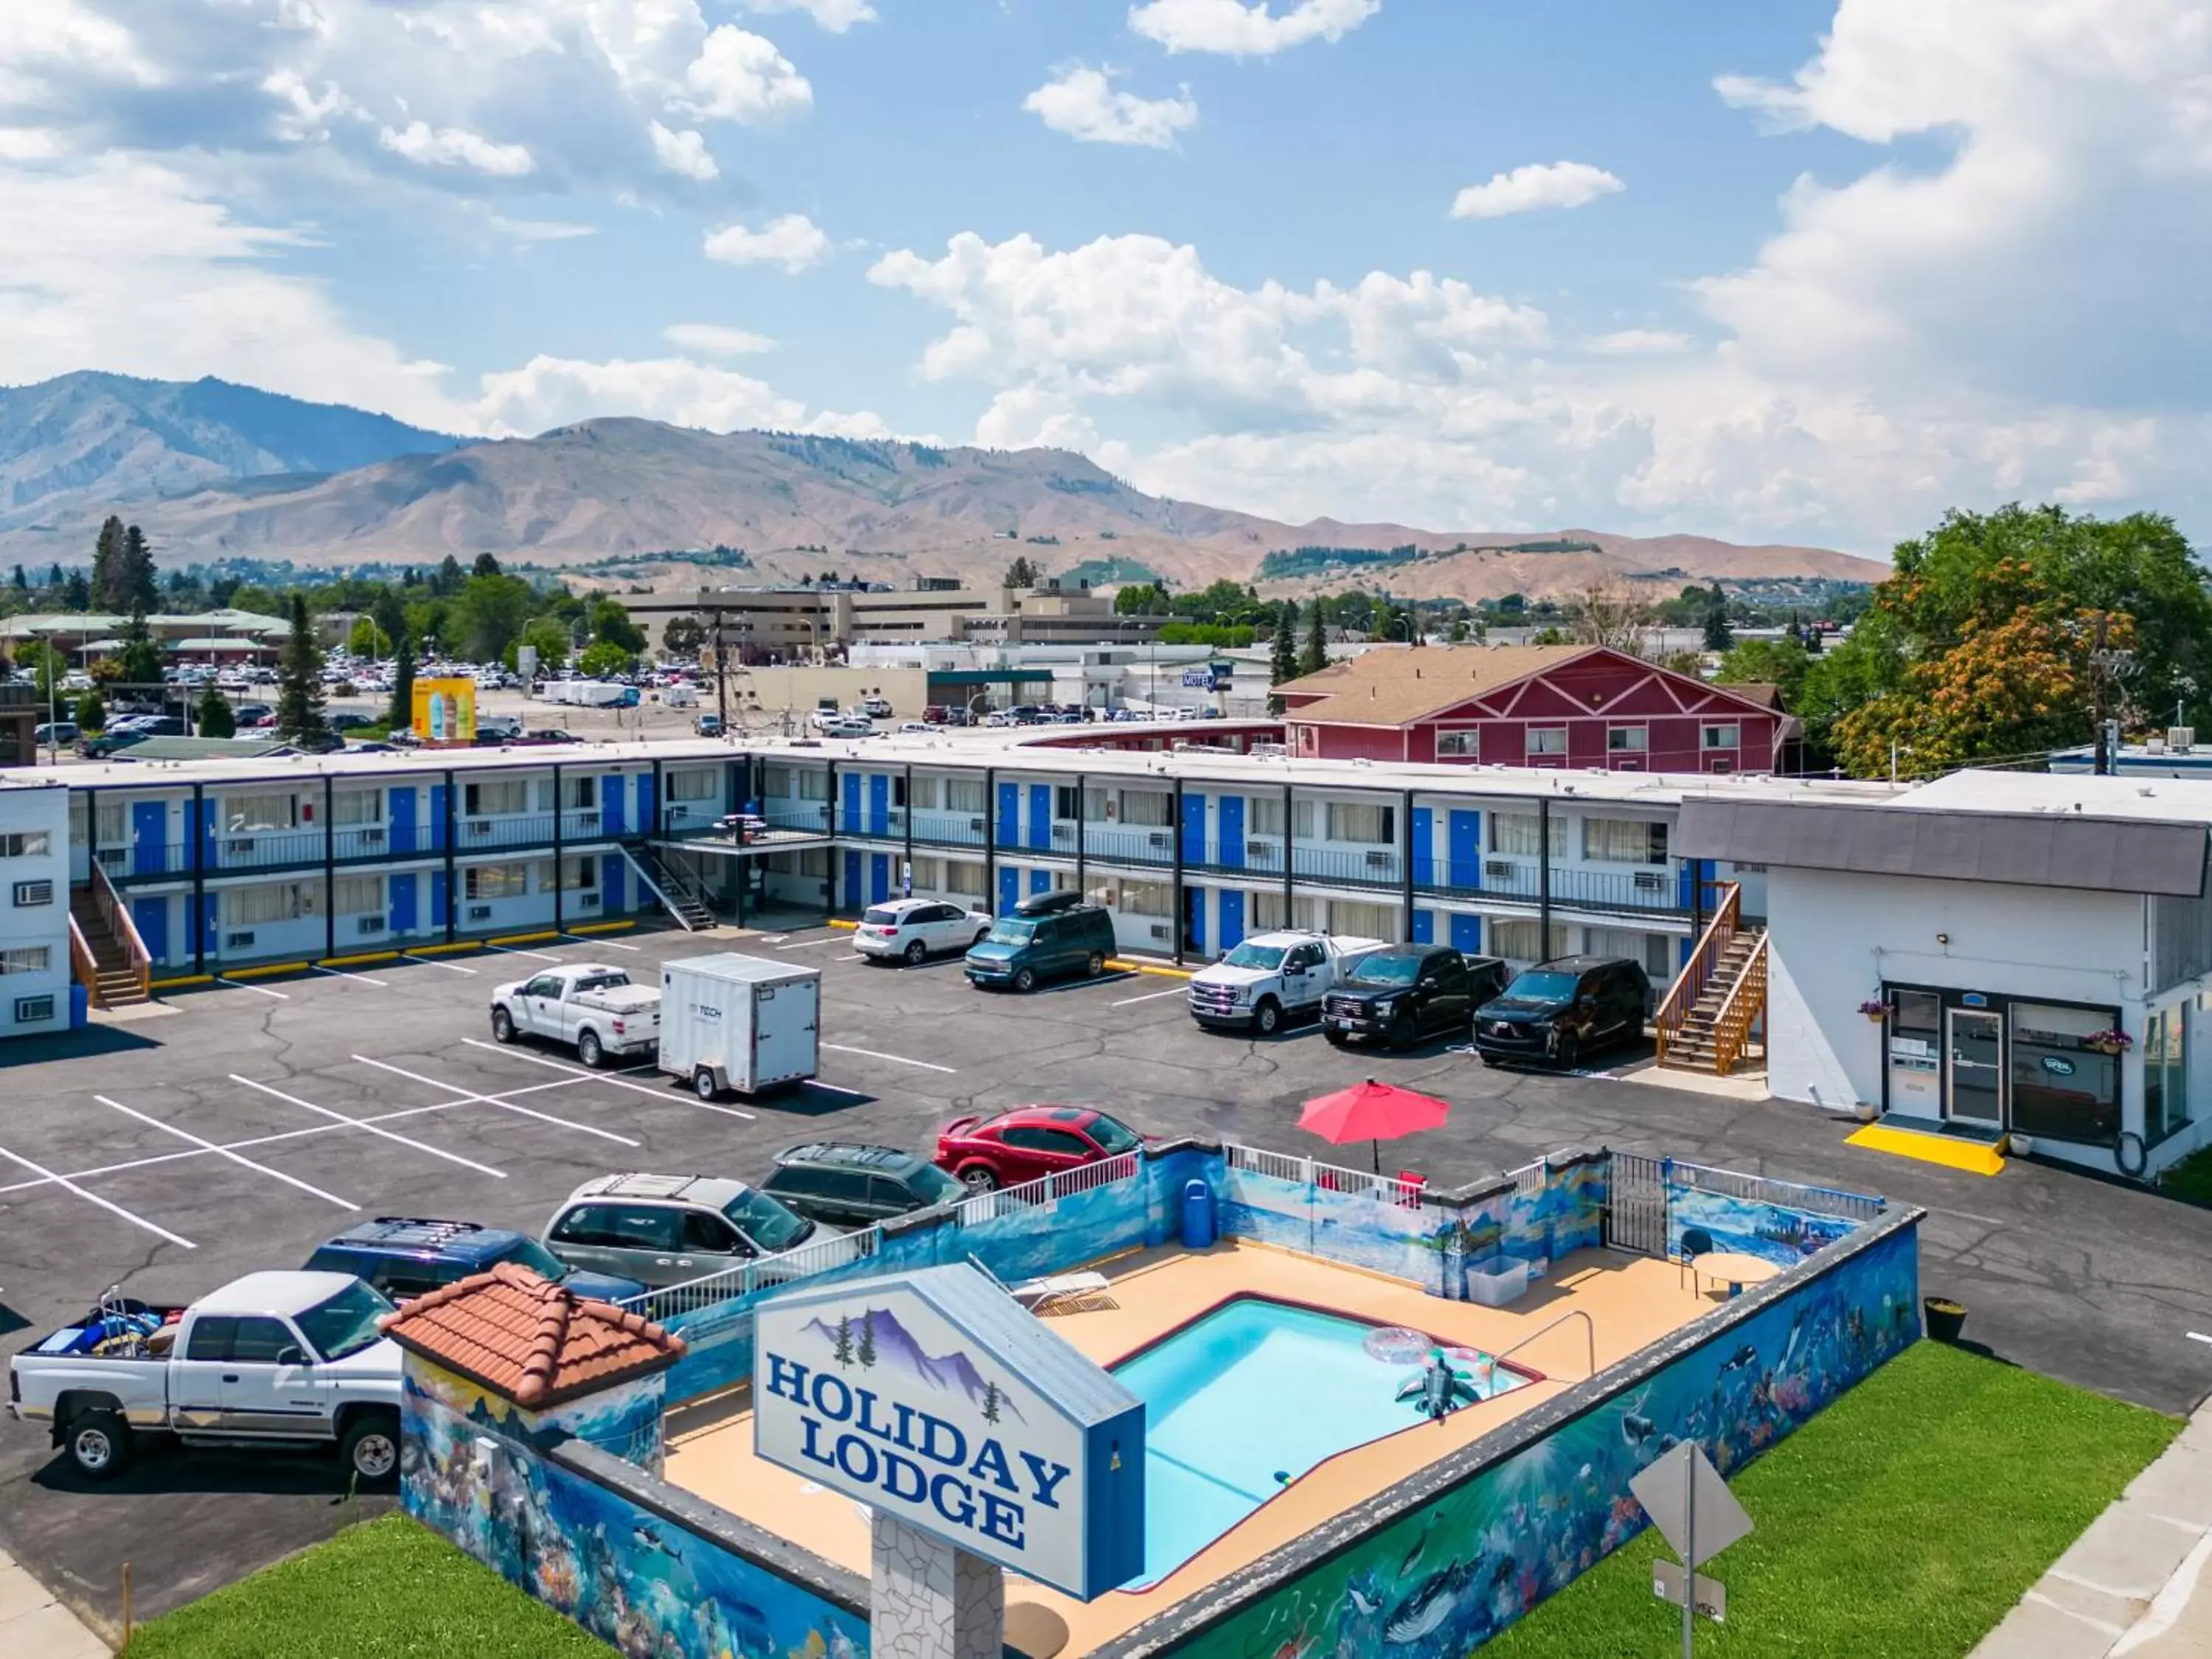 Property building, Pool View in Holiday Lodge Wenatchee